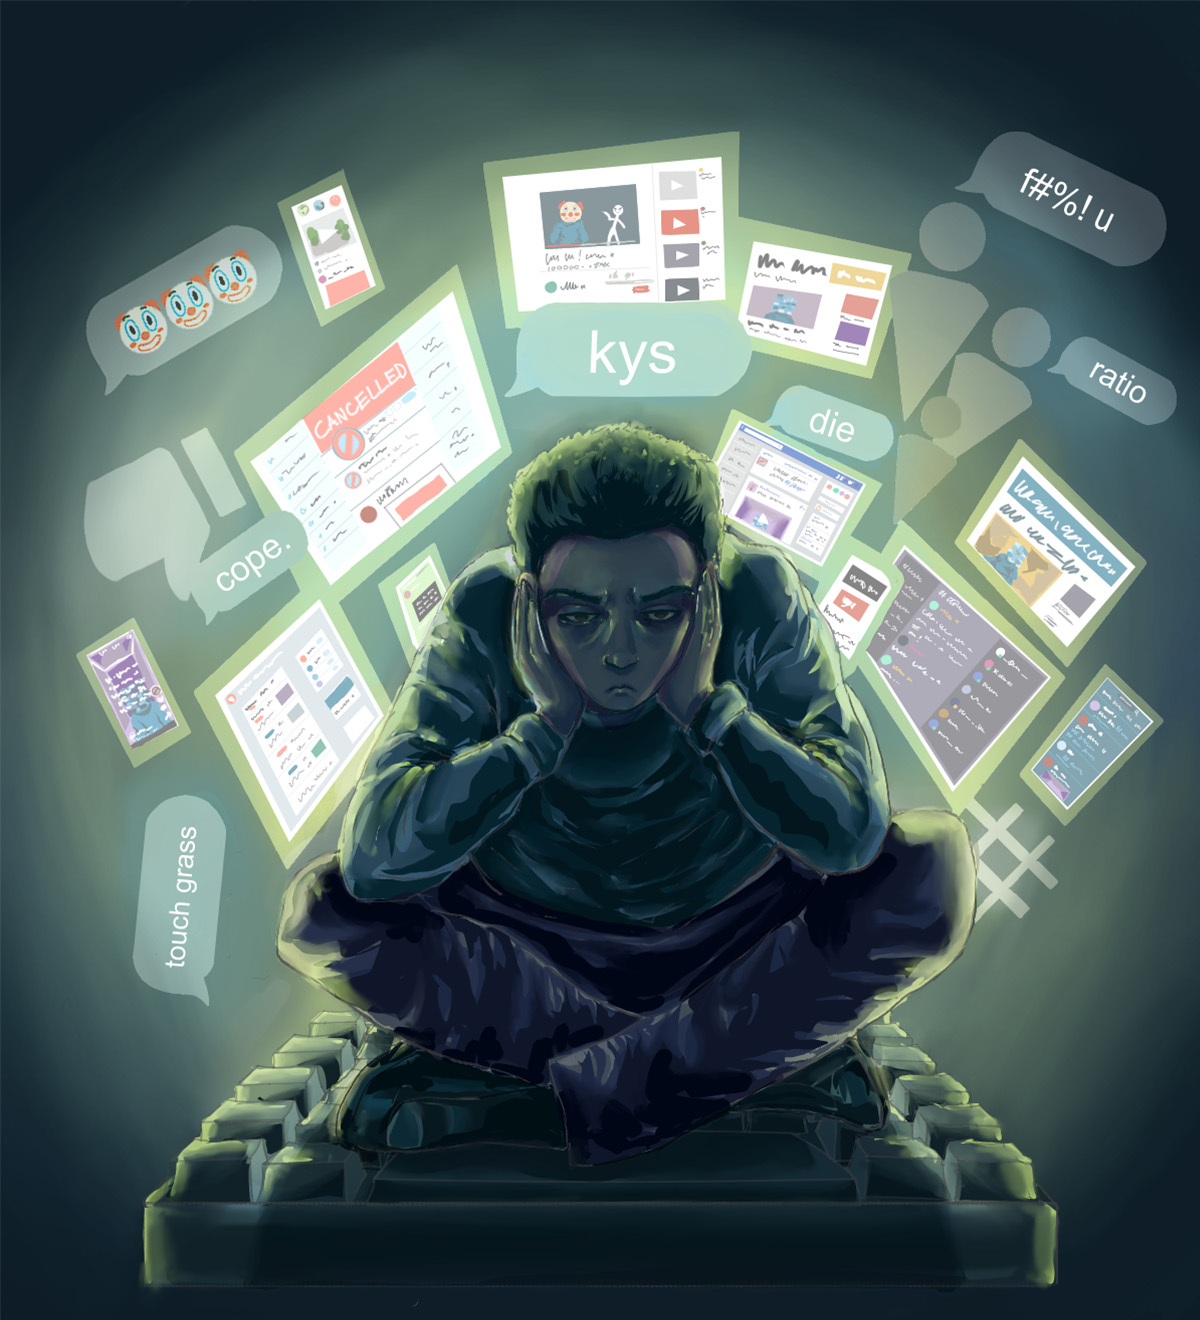 A cross-legged teenager covers his ears looking tired, and is backlit by floating screens and text bubbles mocking him.